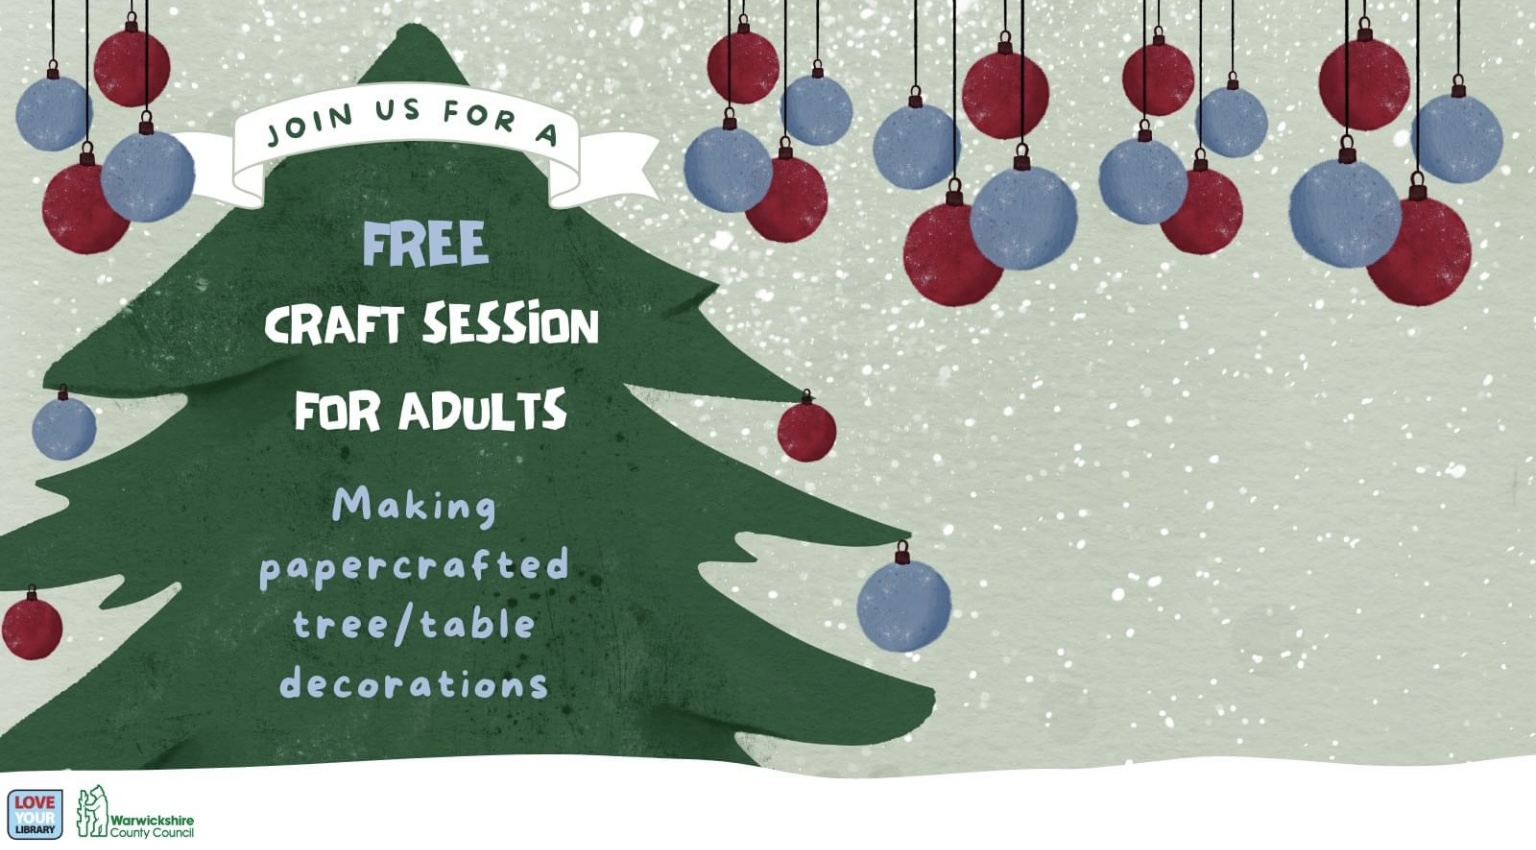 FREE Adult Craft Session at Shipston Library on Thursday 14 December at 11:00